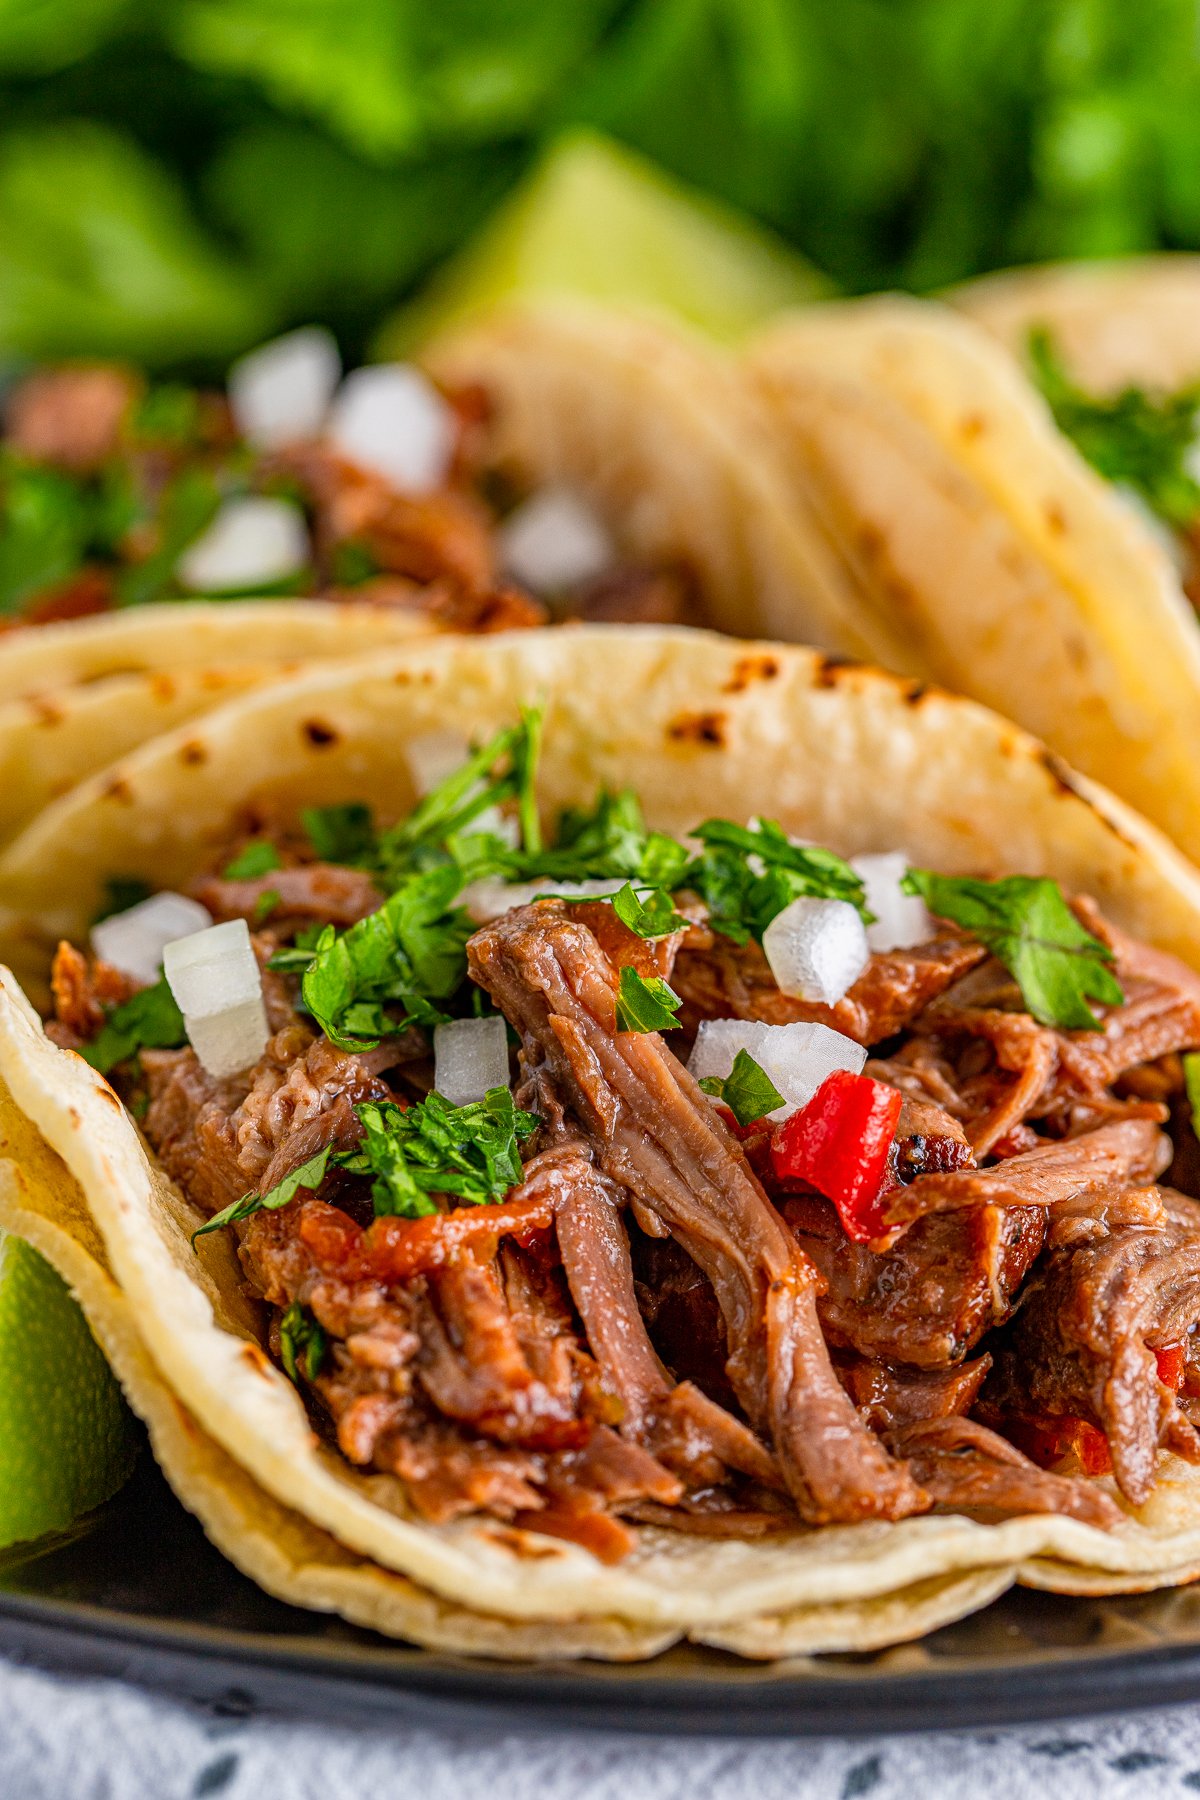 Close up of one taco showing the shredded beef.